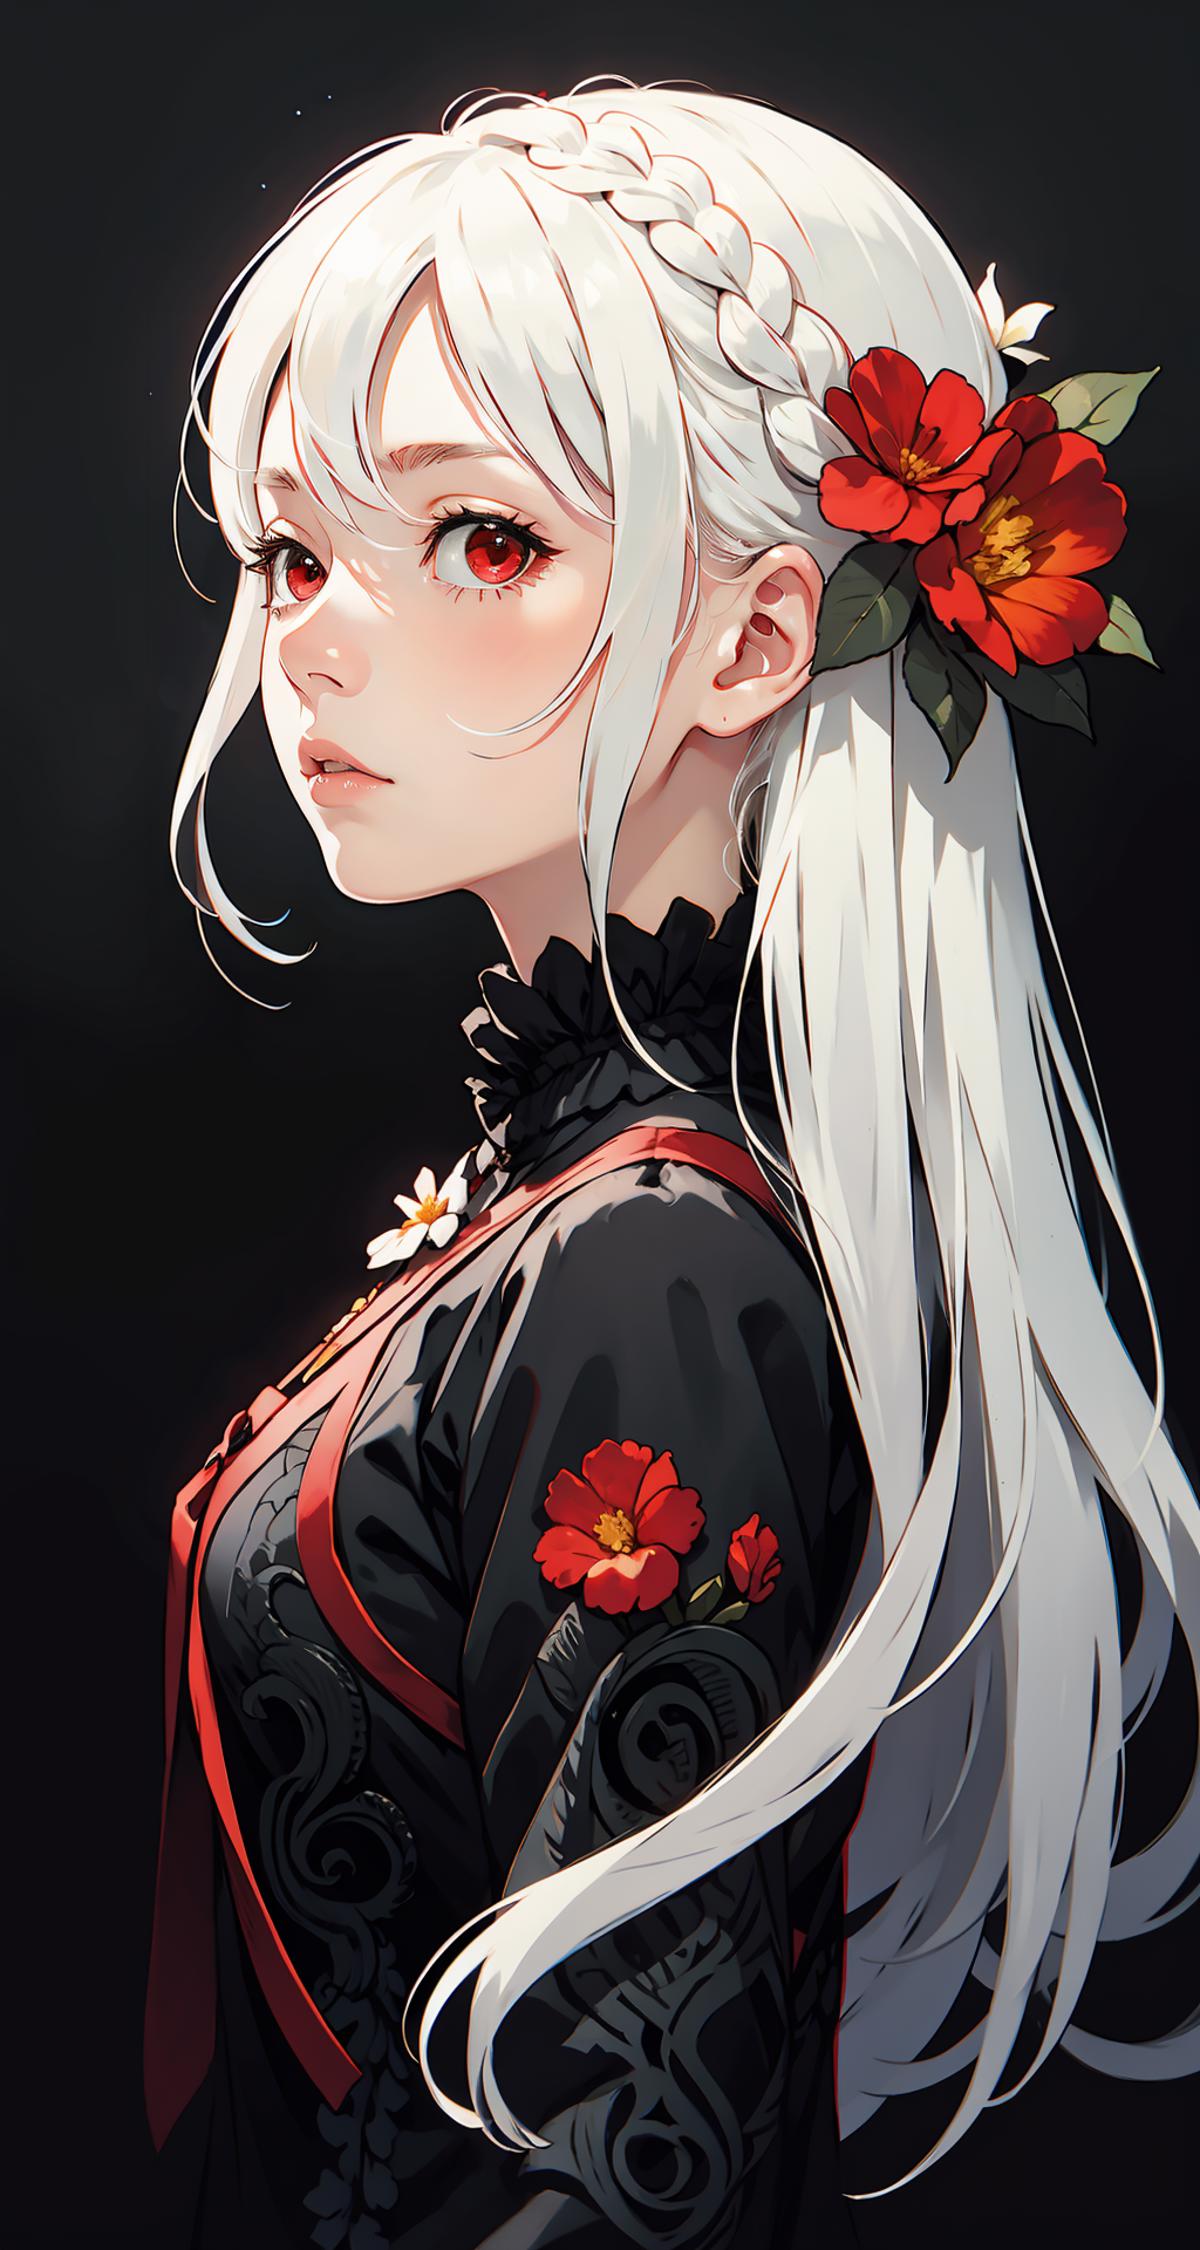 A white and black anime girl with red eyes and a red flower in her hair.